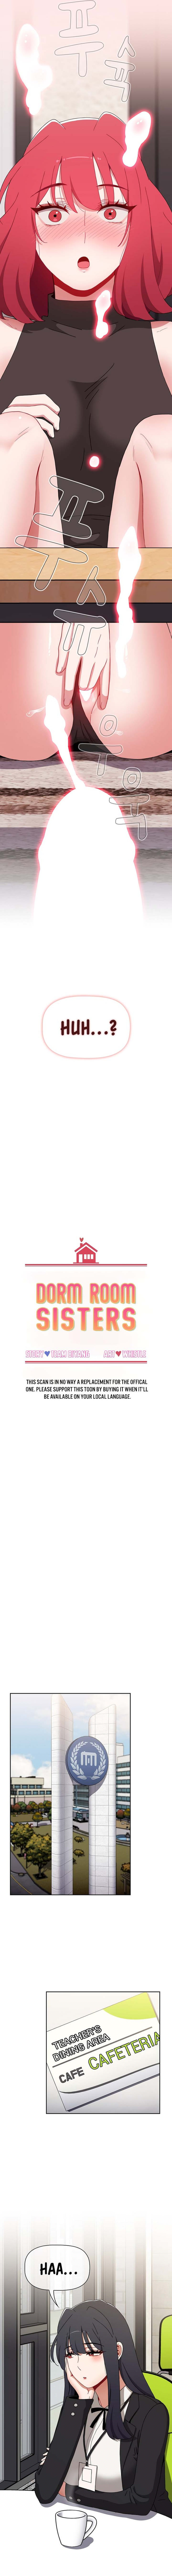 Dorm Room Sisters - Chapter 78 Page 2